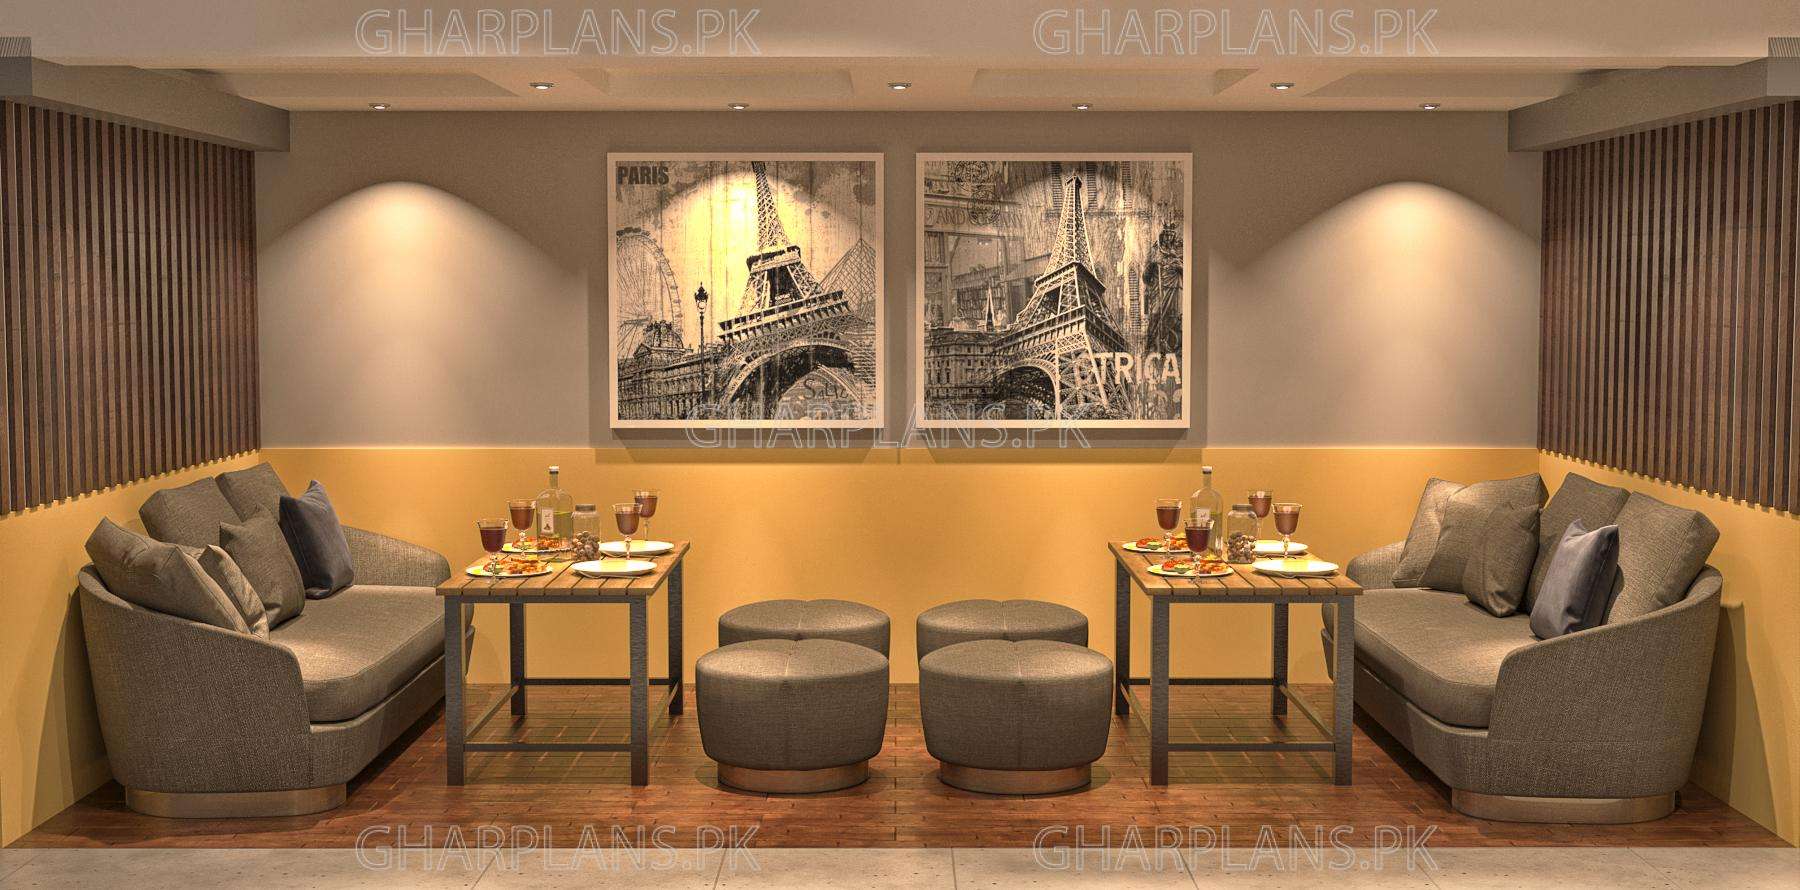 Yellow and grey Color theme in Restaurant Interiors